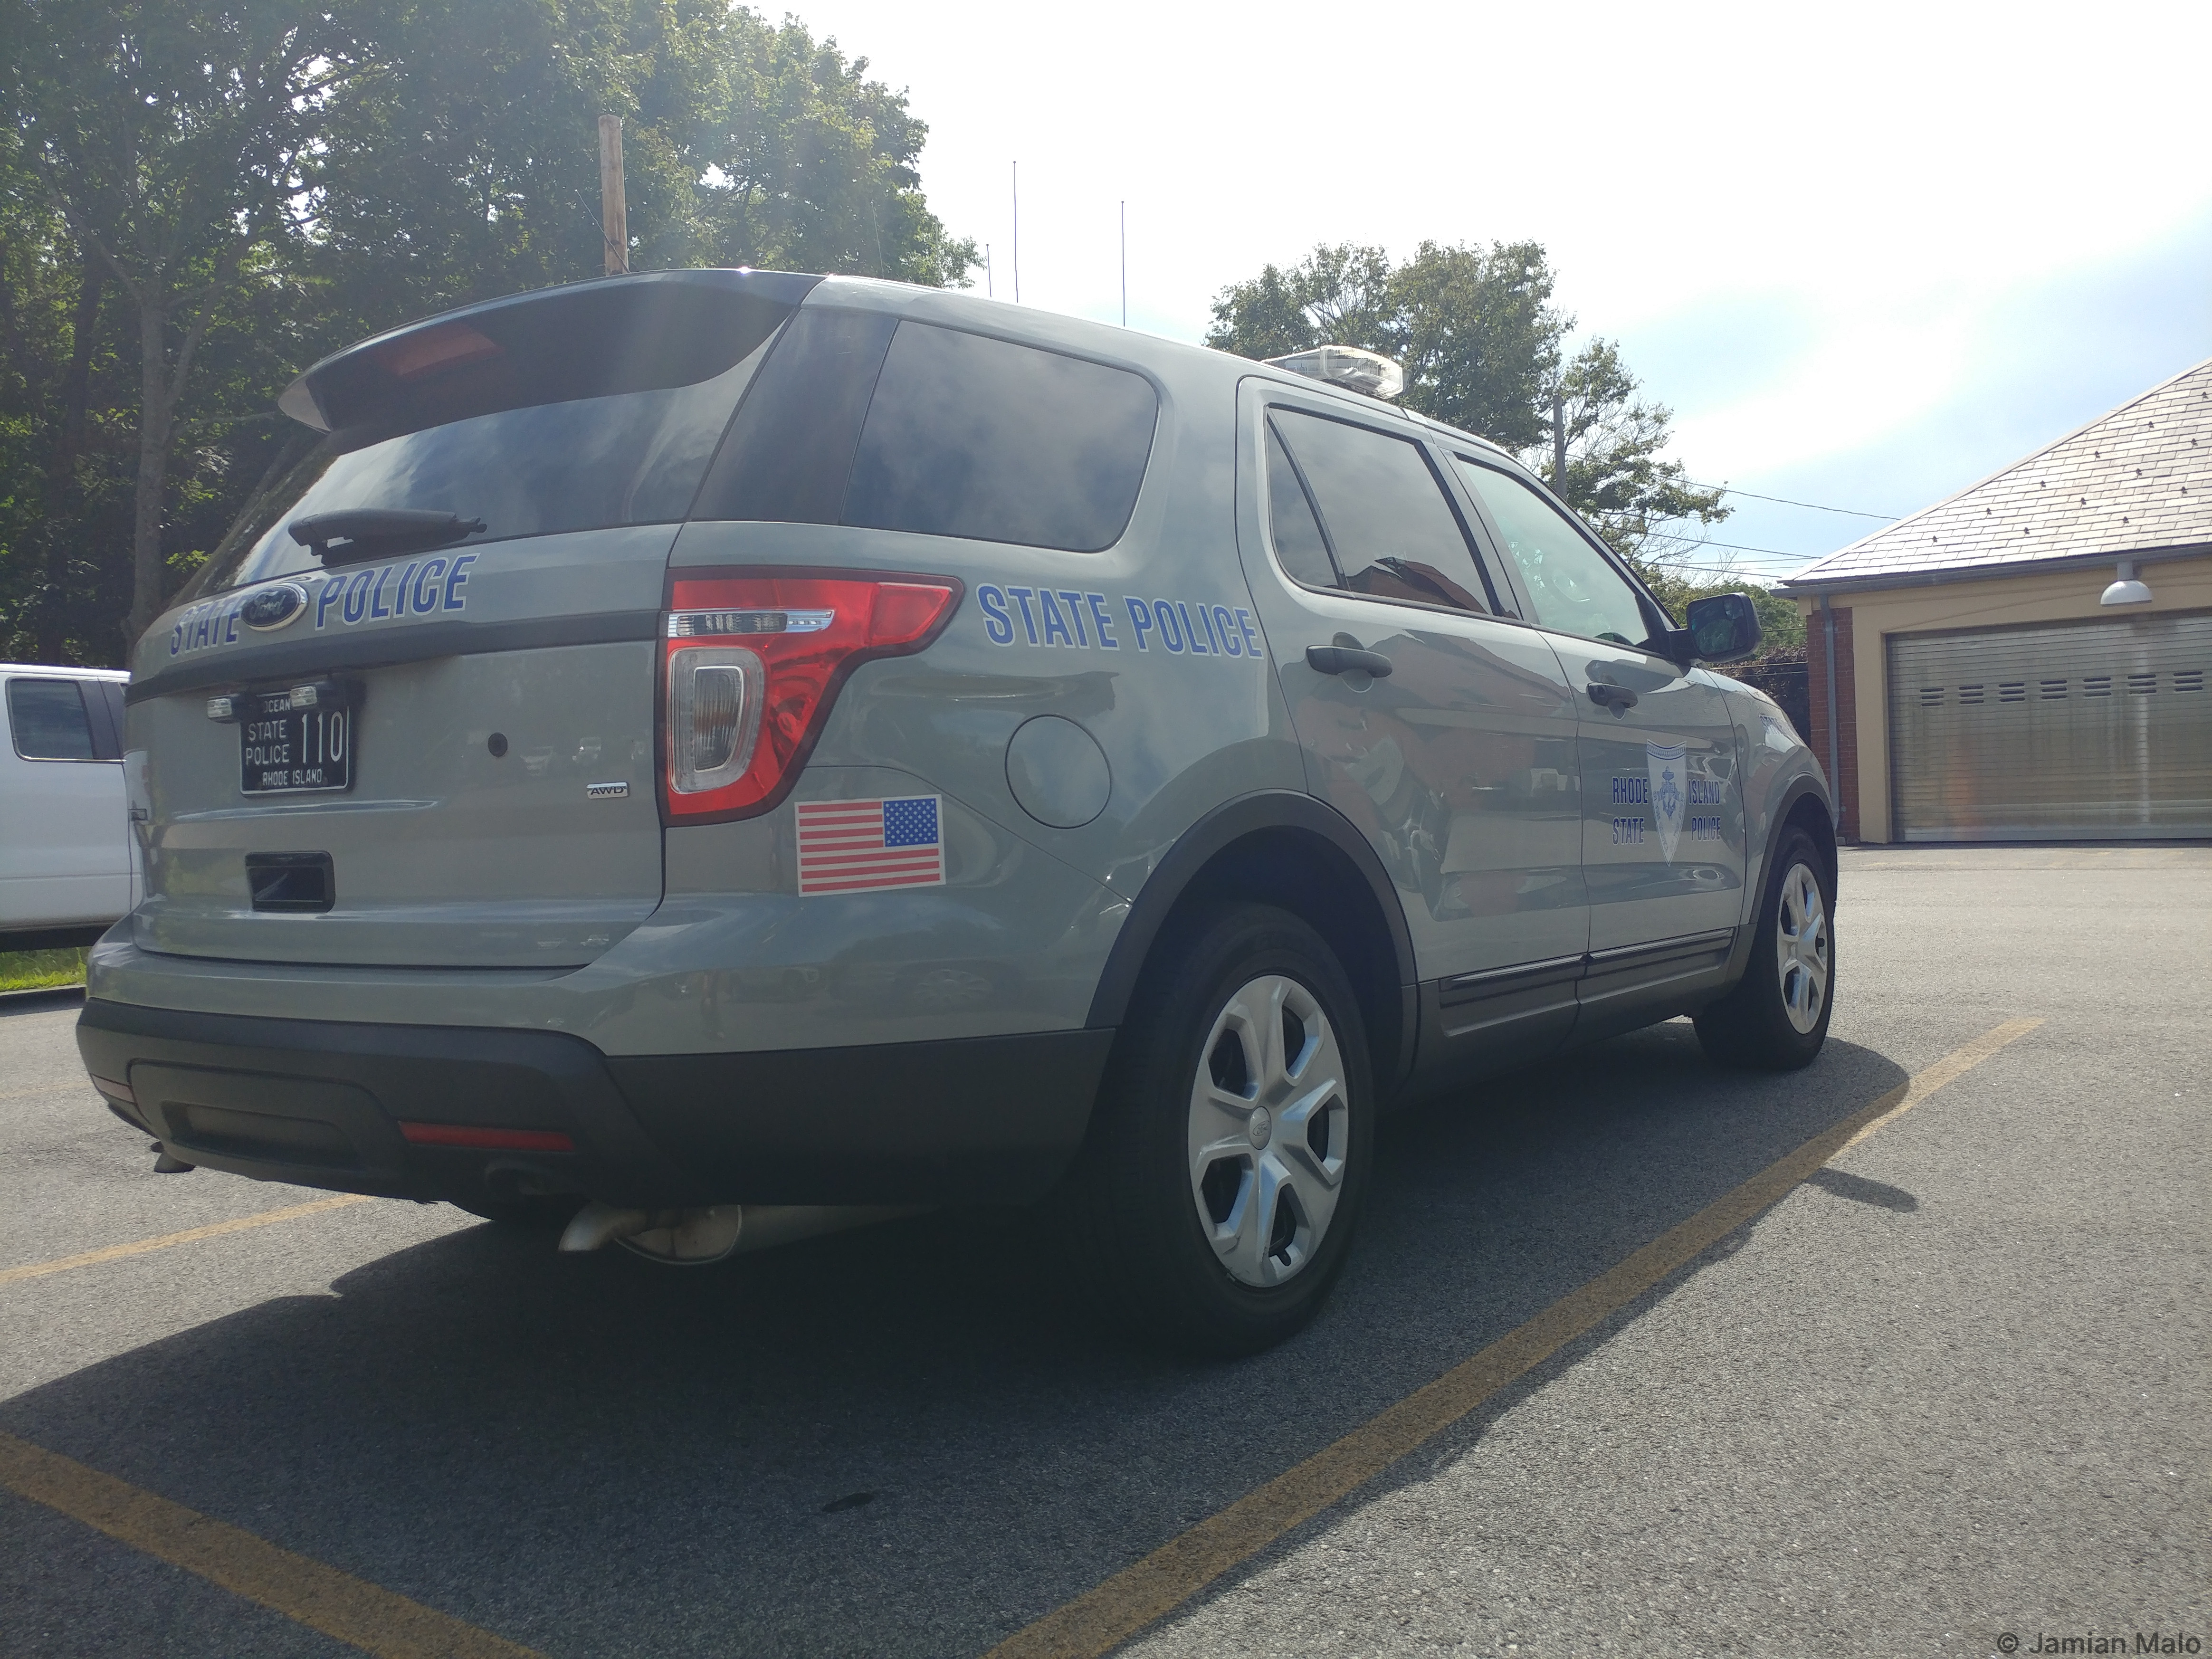 A photo  of Rhode Island State Police
            Cruiser 110, a 2013-2015 Ford Police Interceptor Utility             taken by Jamian Malo